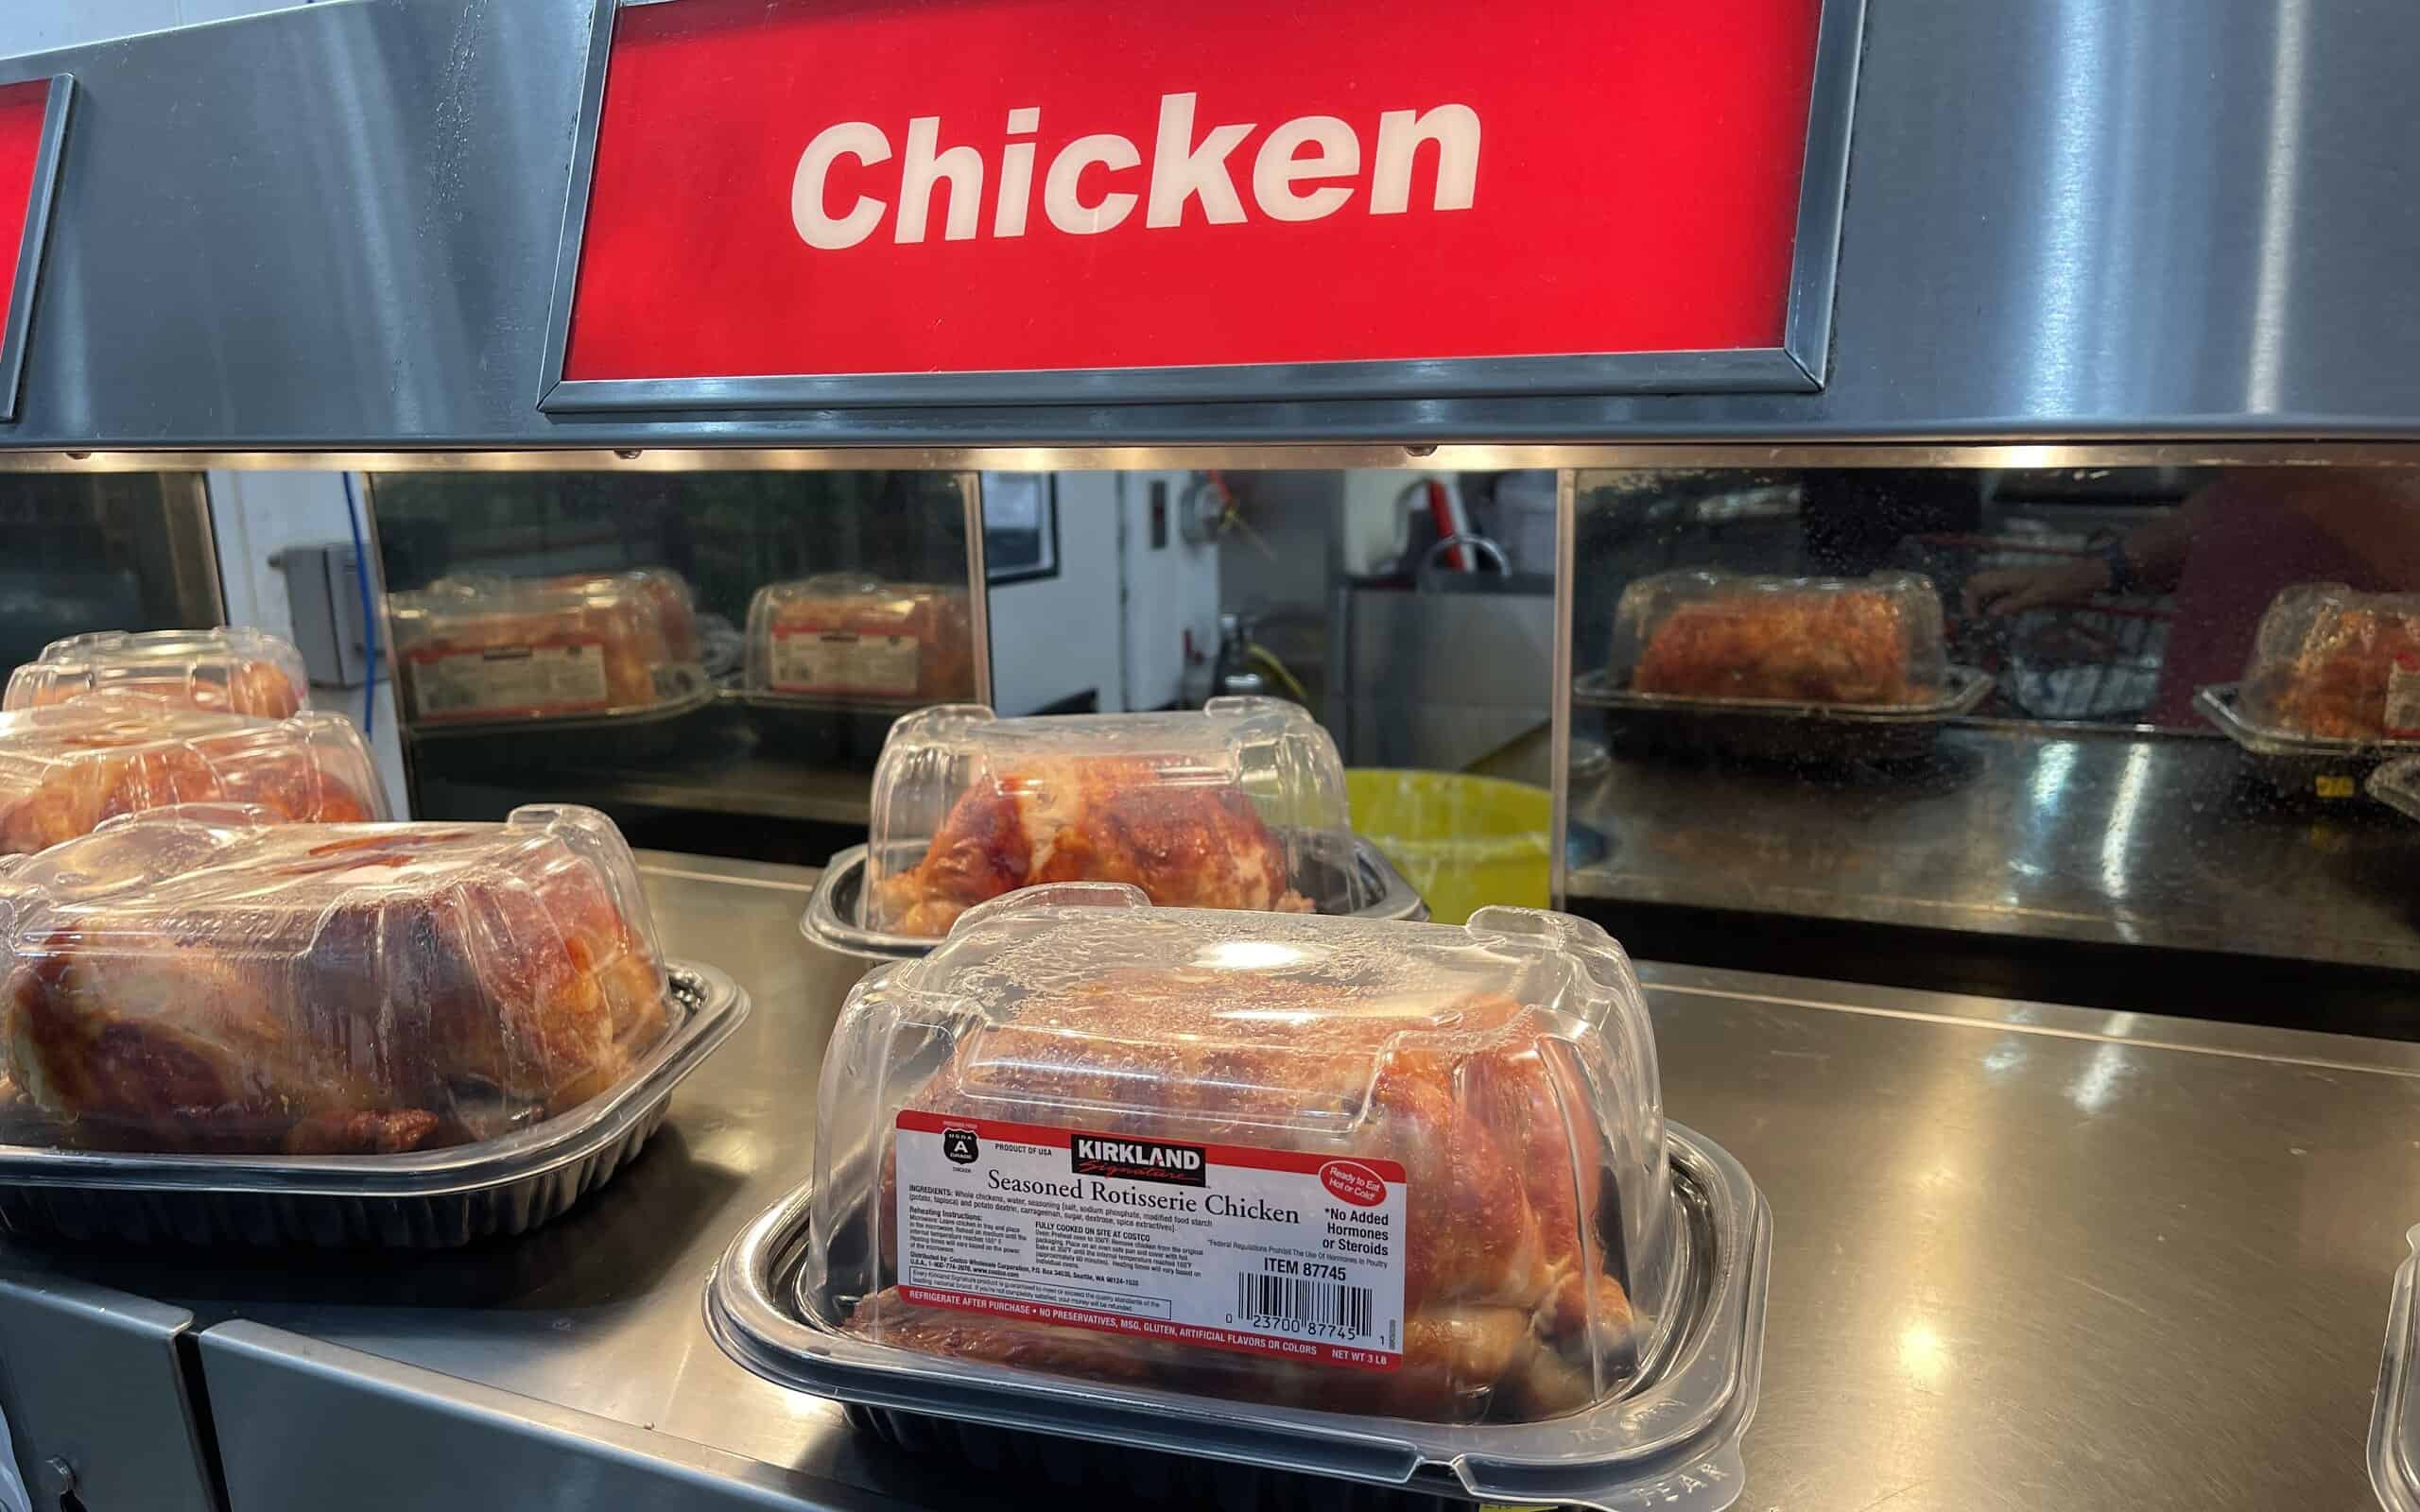 Salmon burgers went missing for a while. Now they're back. : r/Costco